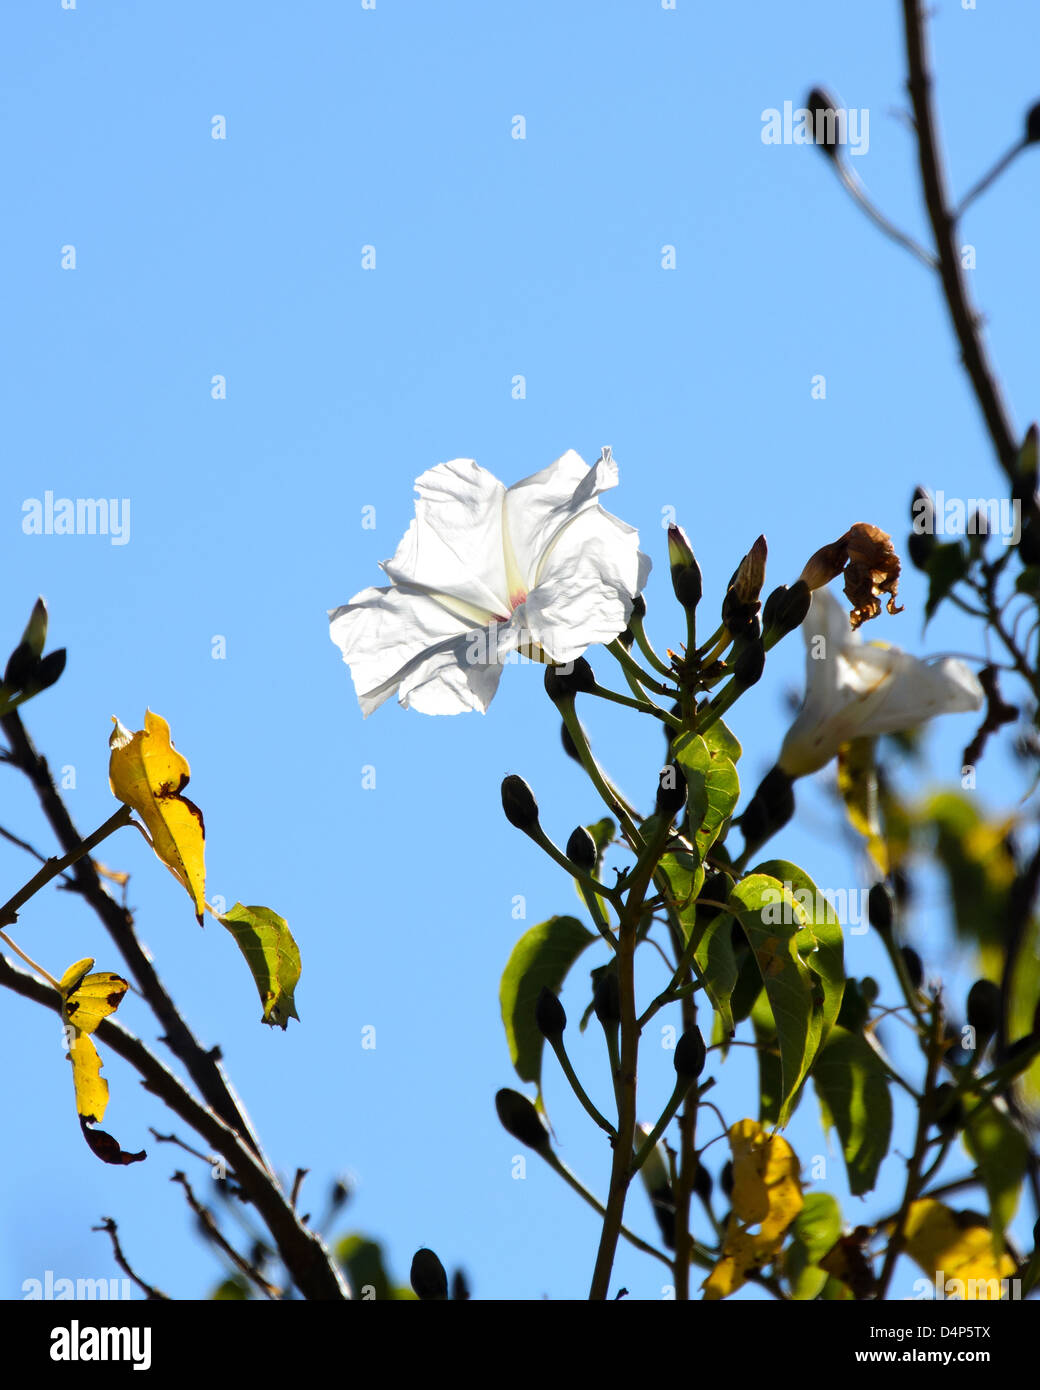 The white flower of a casahuate tree is backlit against a clear blue sky at Monte Alban, Oaxaca, Mexico. Stock Photo